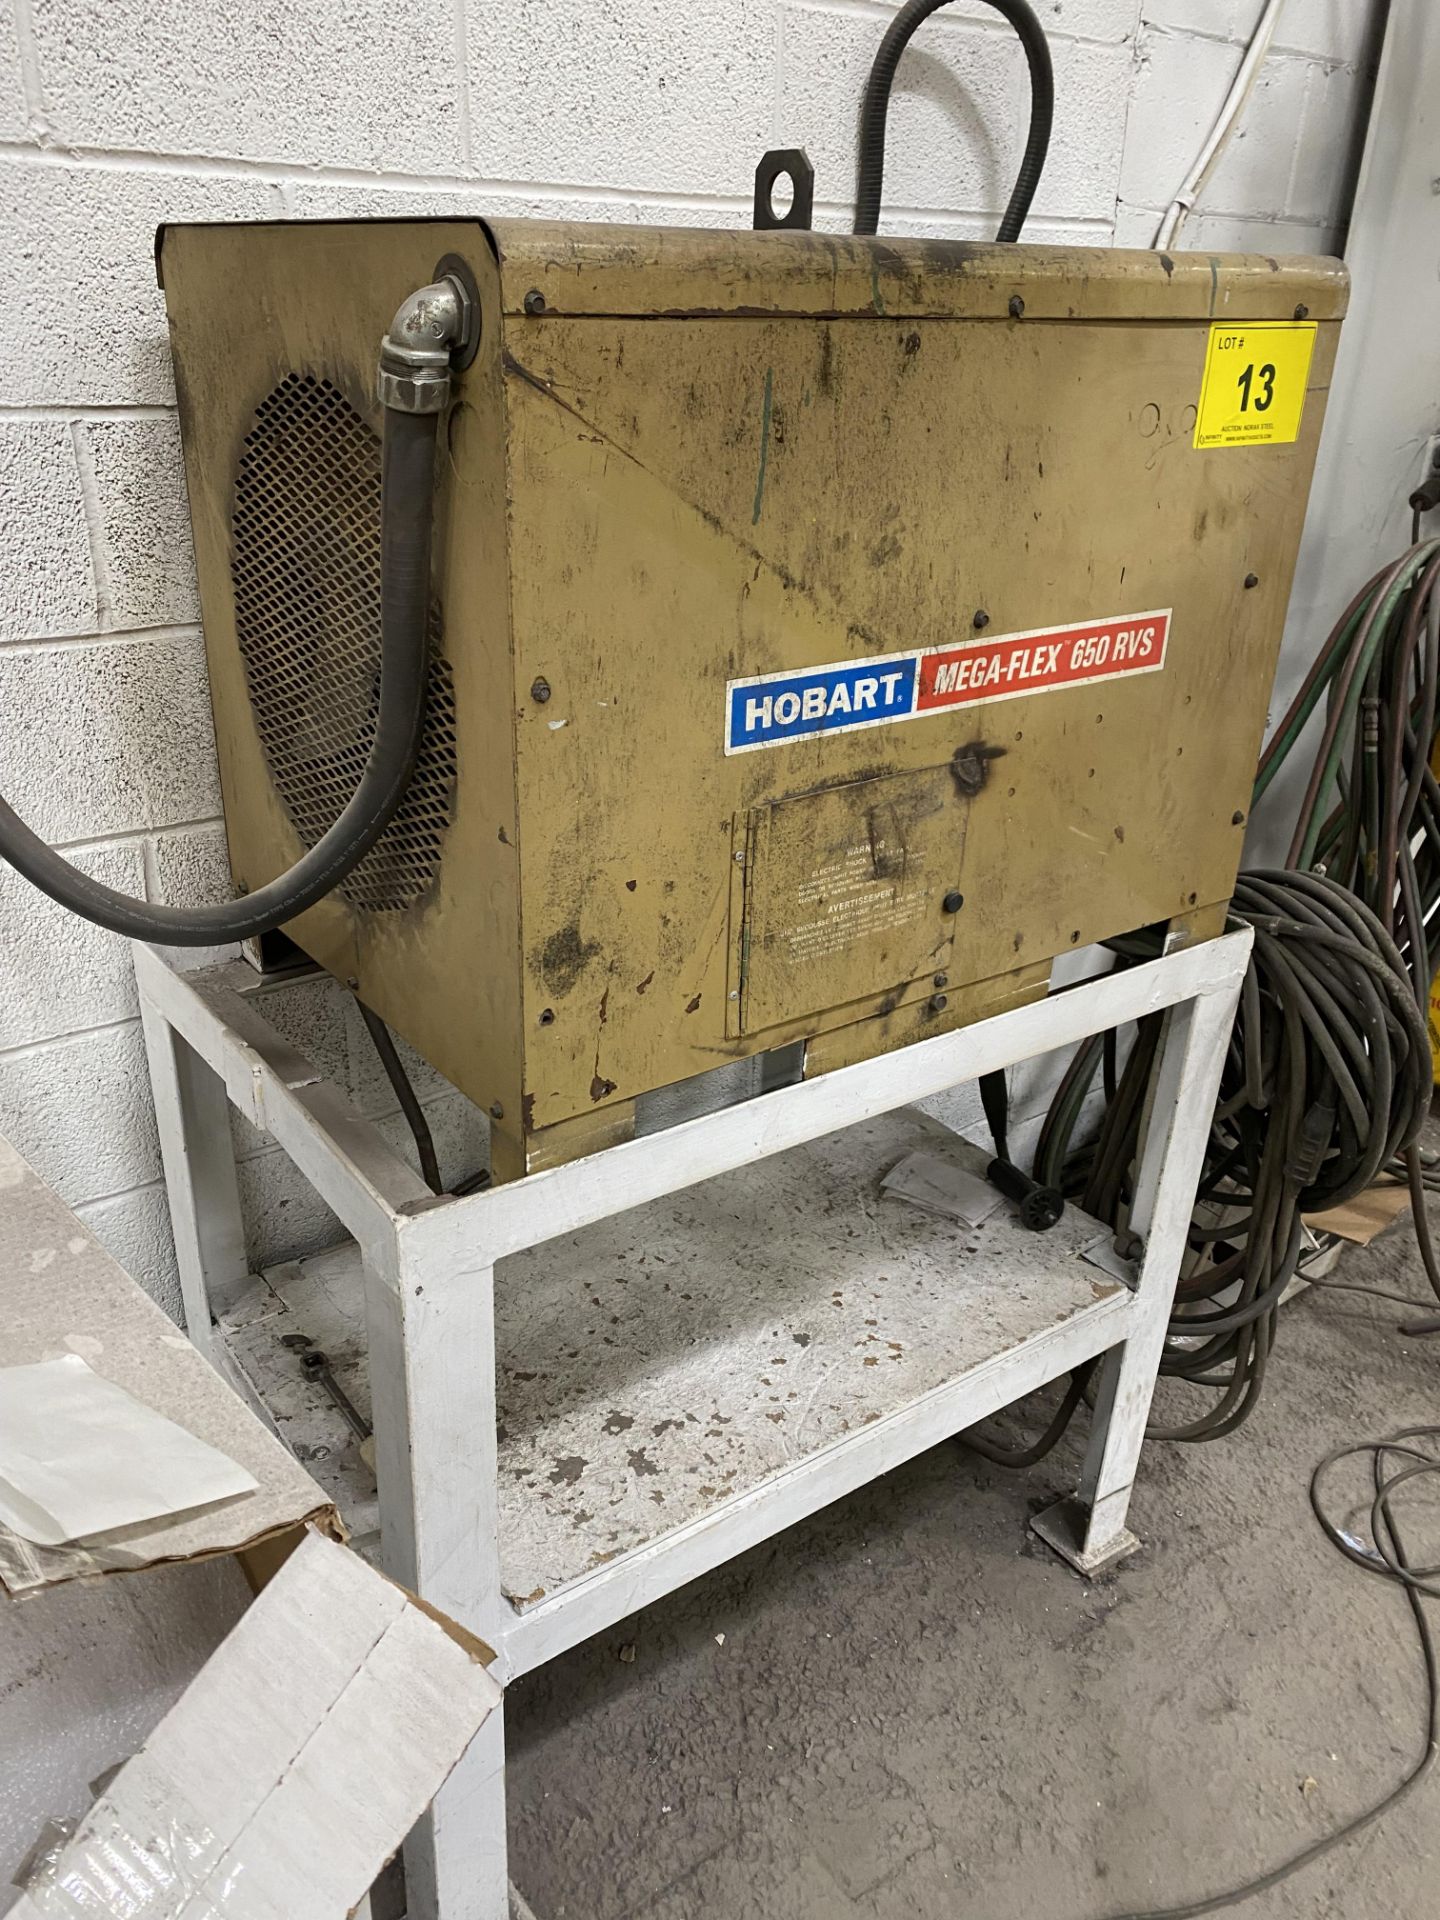 HOBART MEGA-FLEX 650 RVS MIG WELDER W/ HOBART WIRE FEEDER, CABLES AND STAND - Image 4 of 7